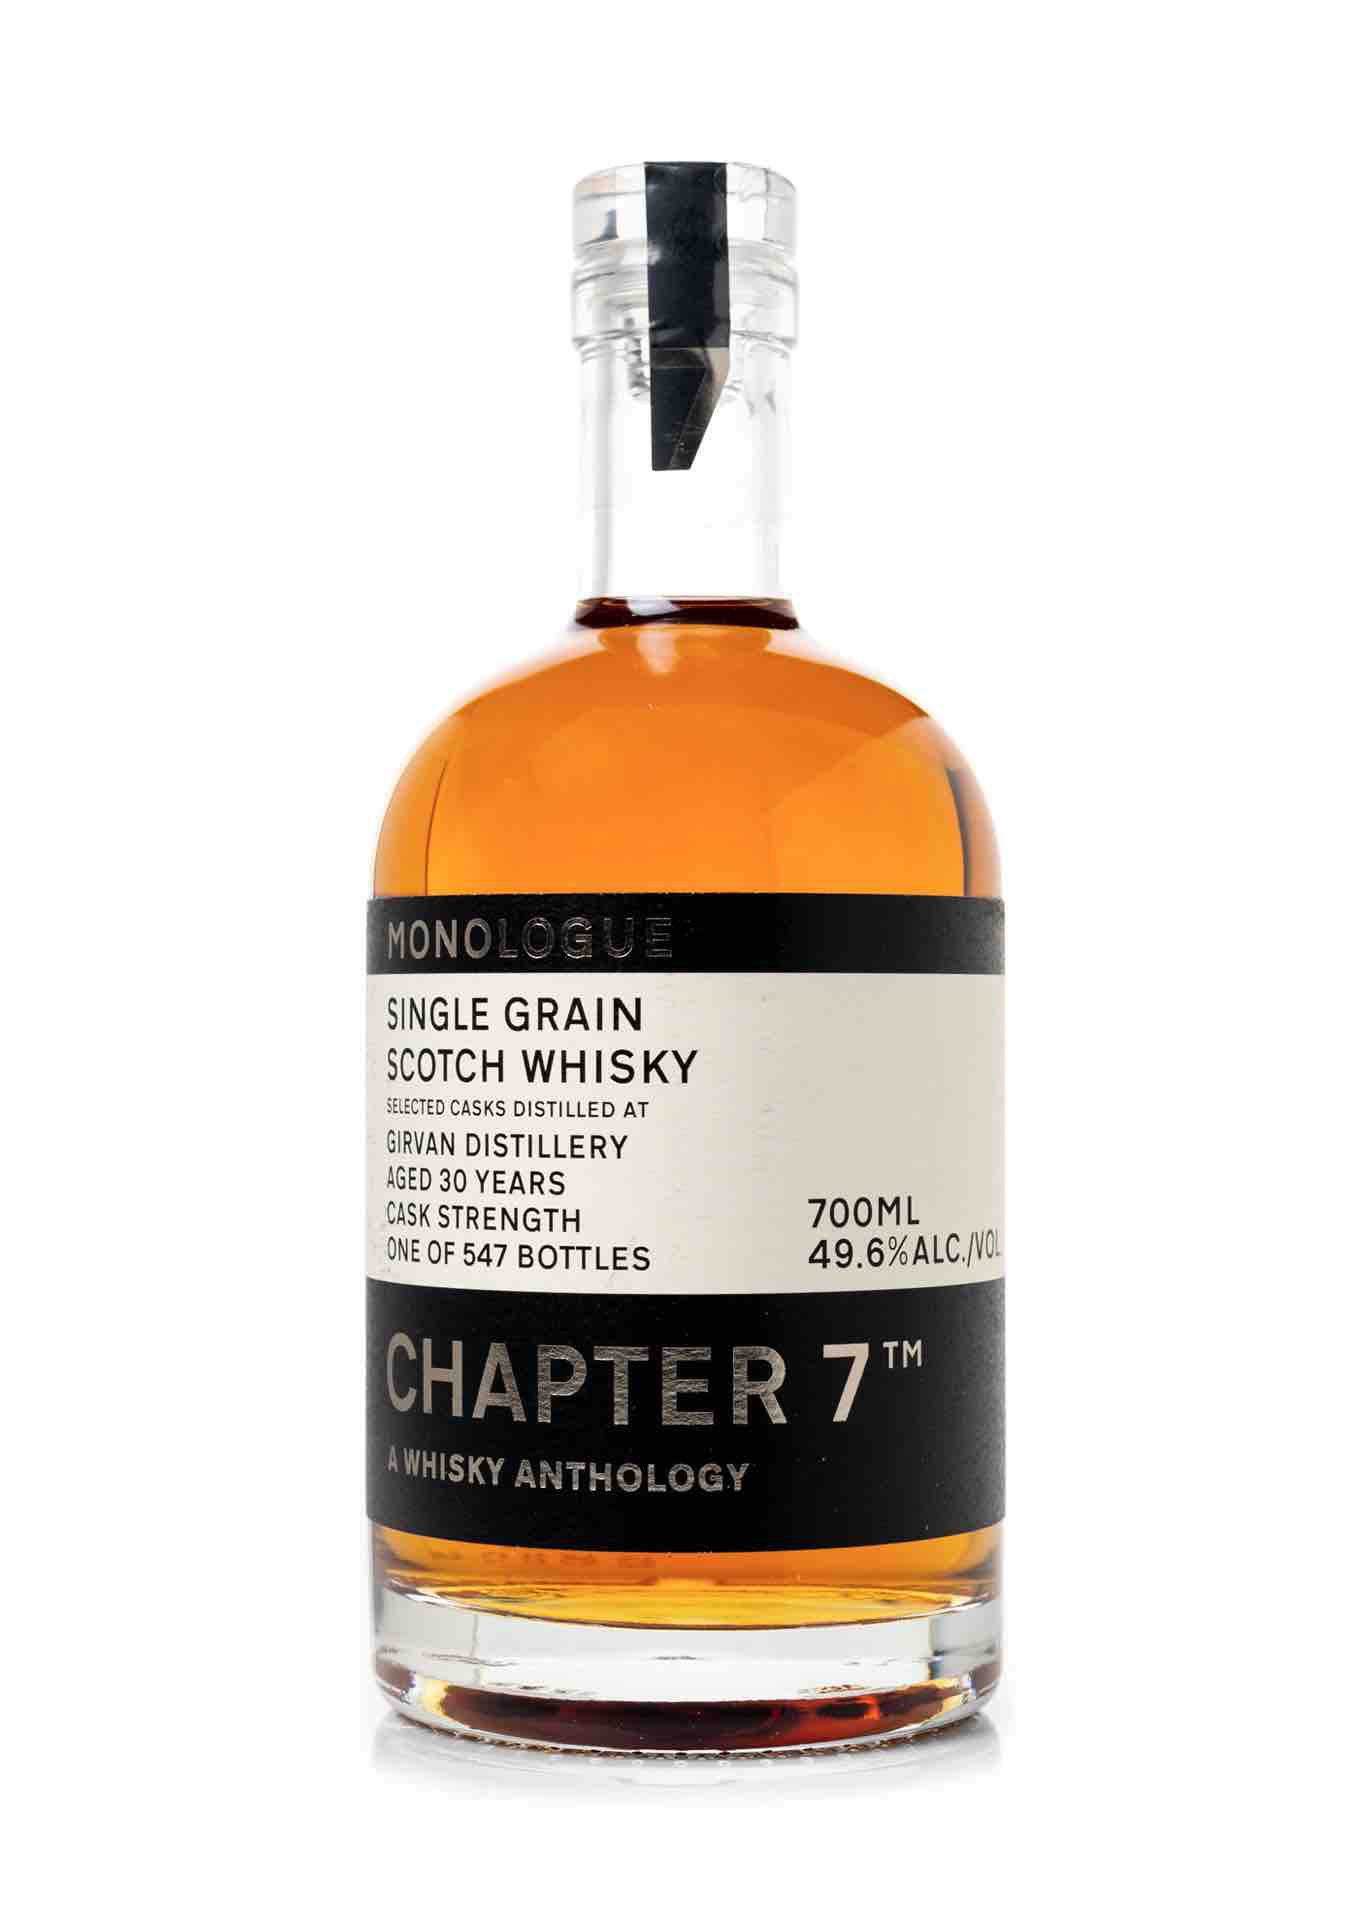 Chapter 7: Monologue Girvan 30 Year Old Single Grain Scotch Whisky